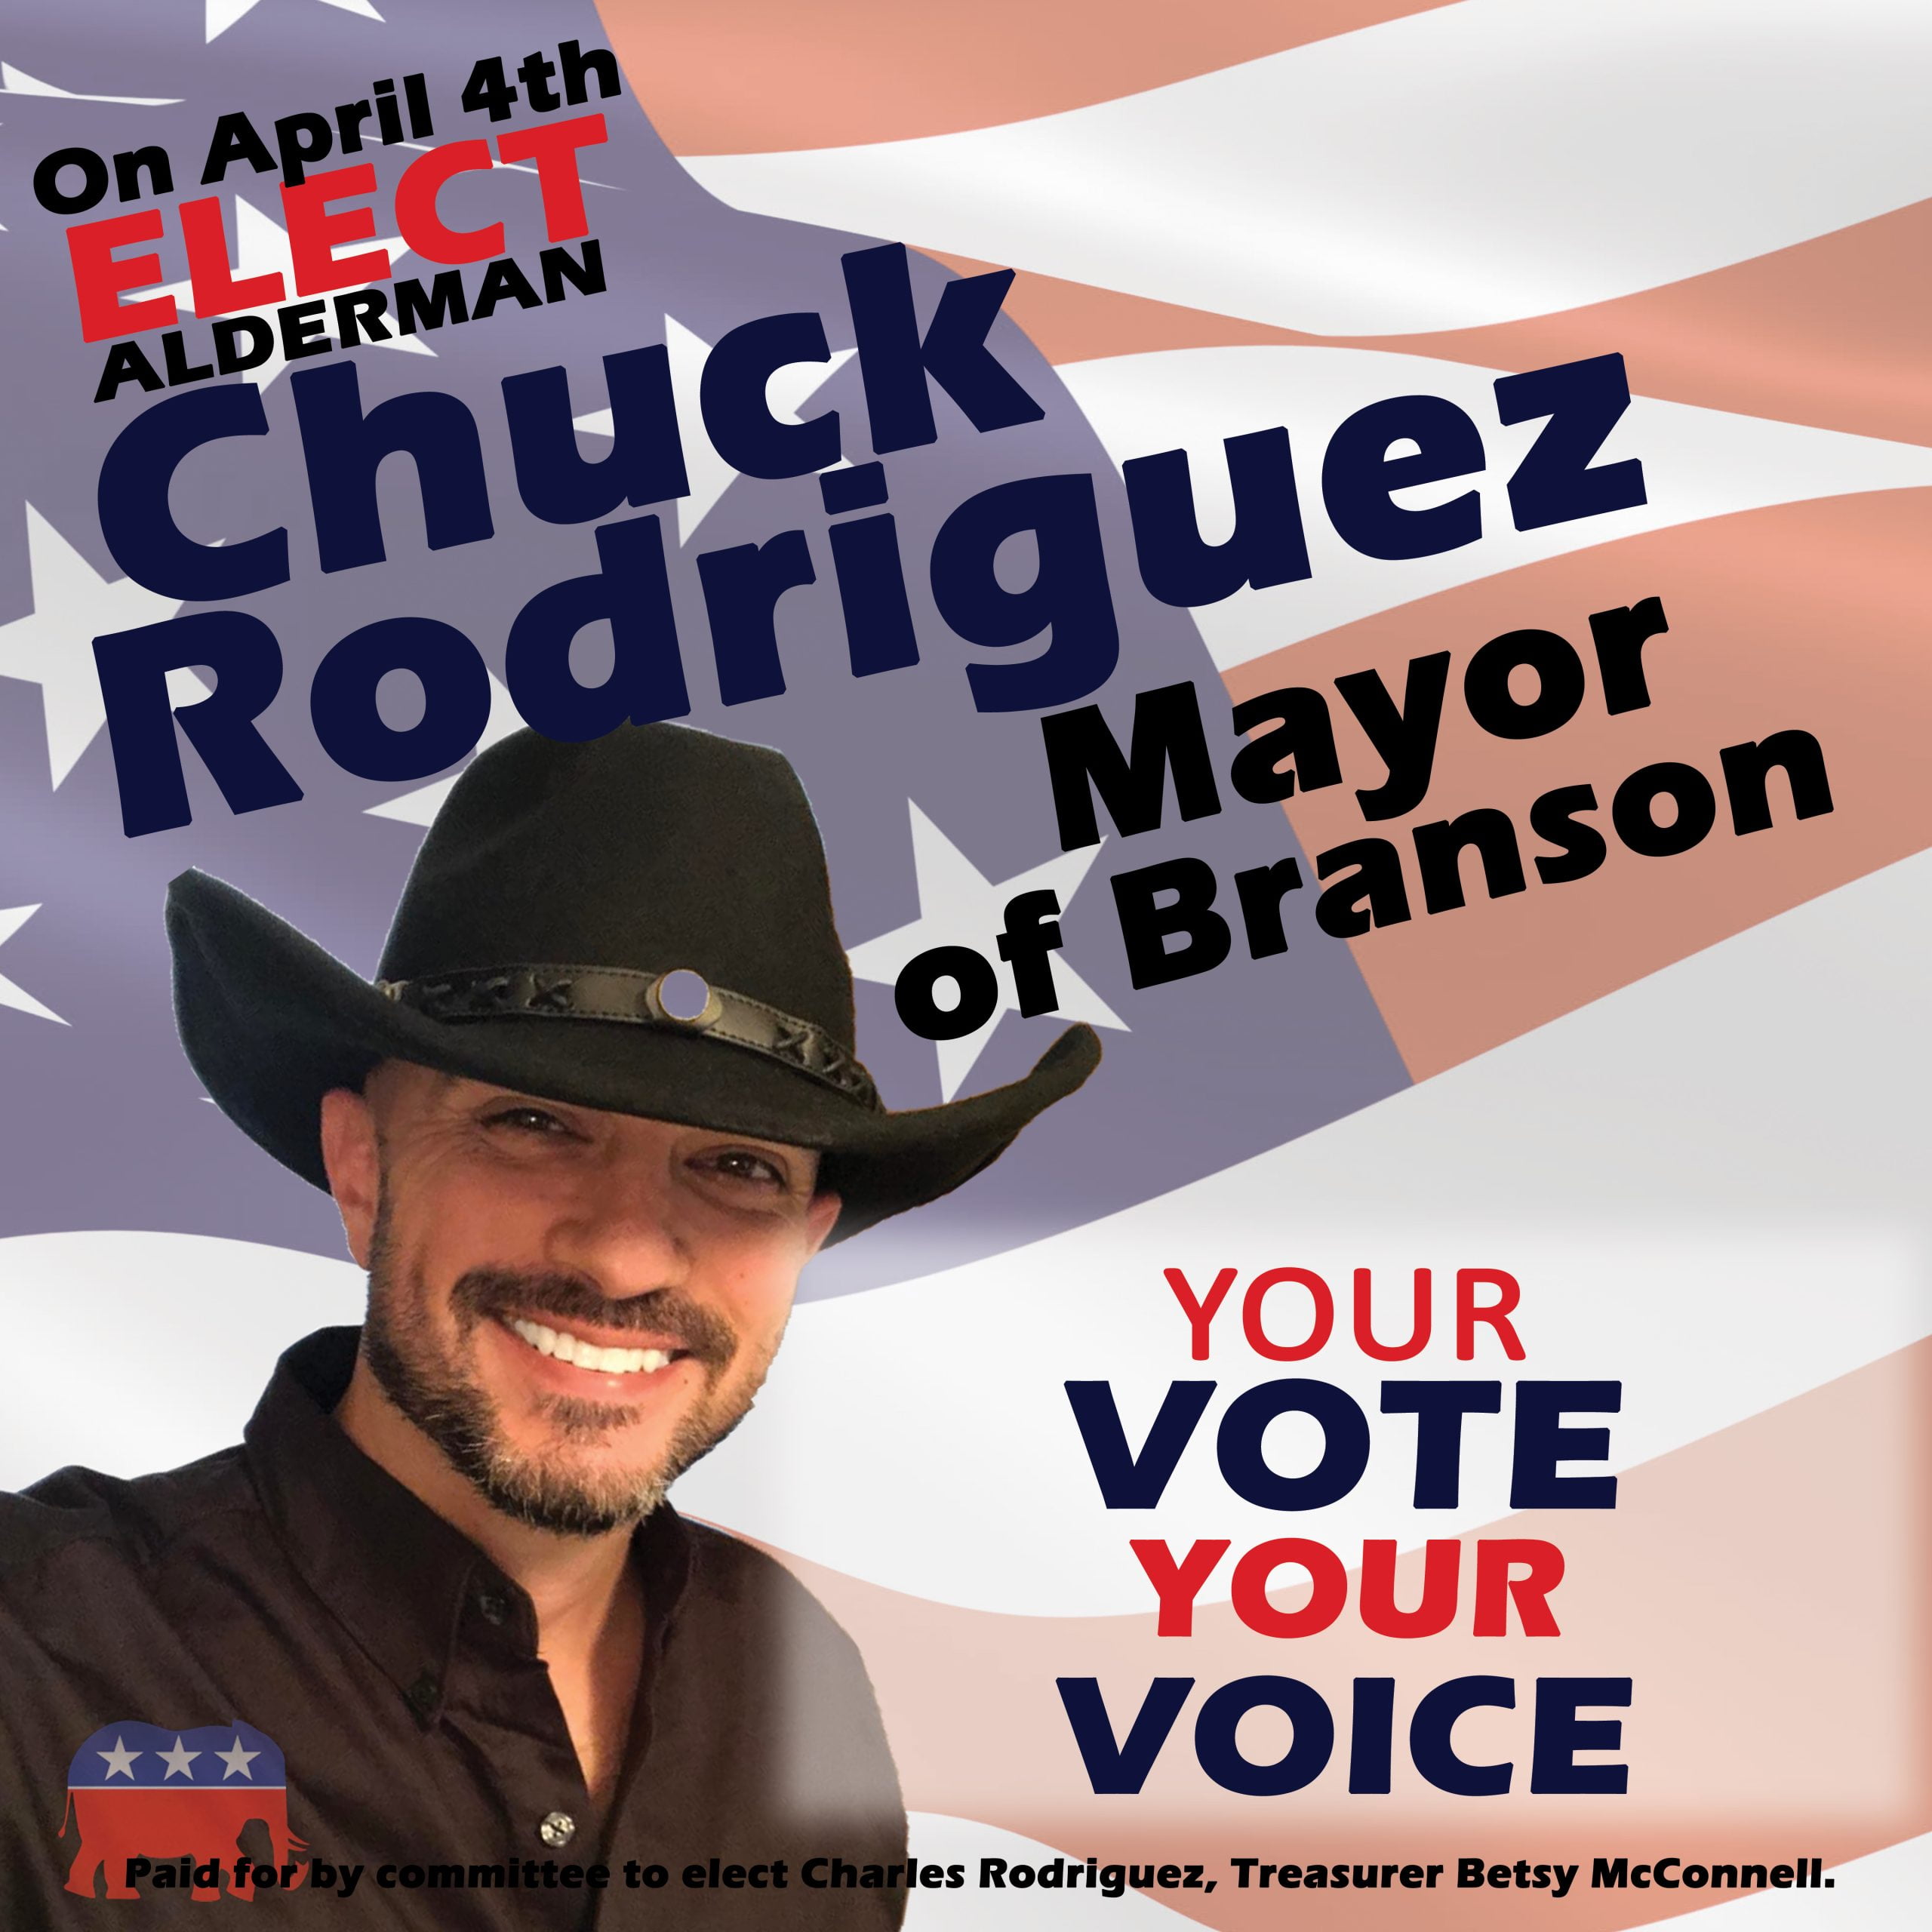 Chuck Rodriguez for Branson Mayor Sign designed by DDM Creative